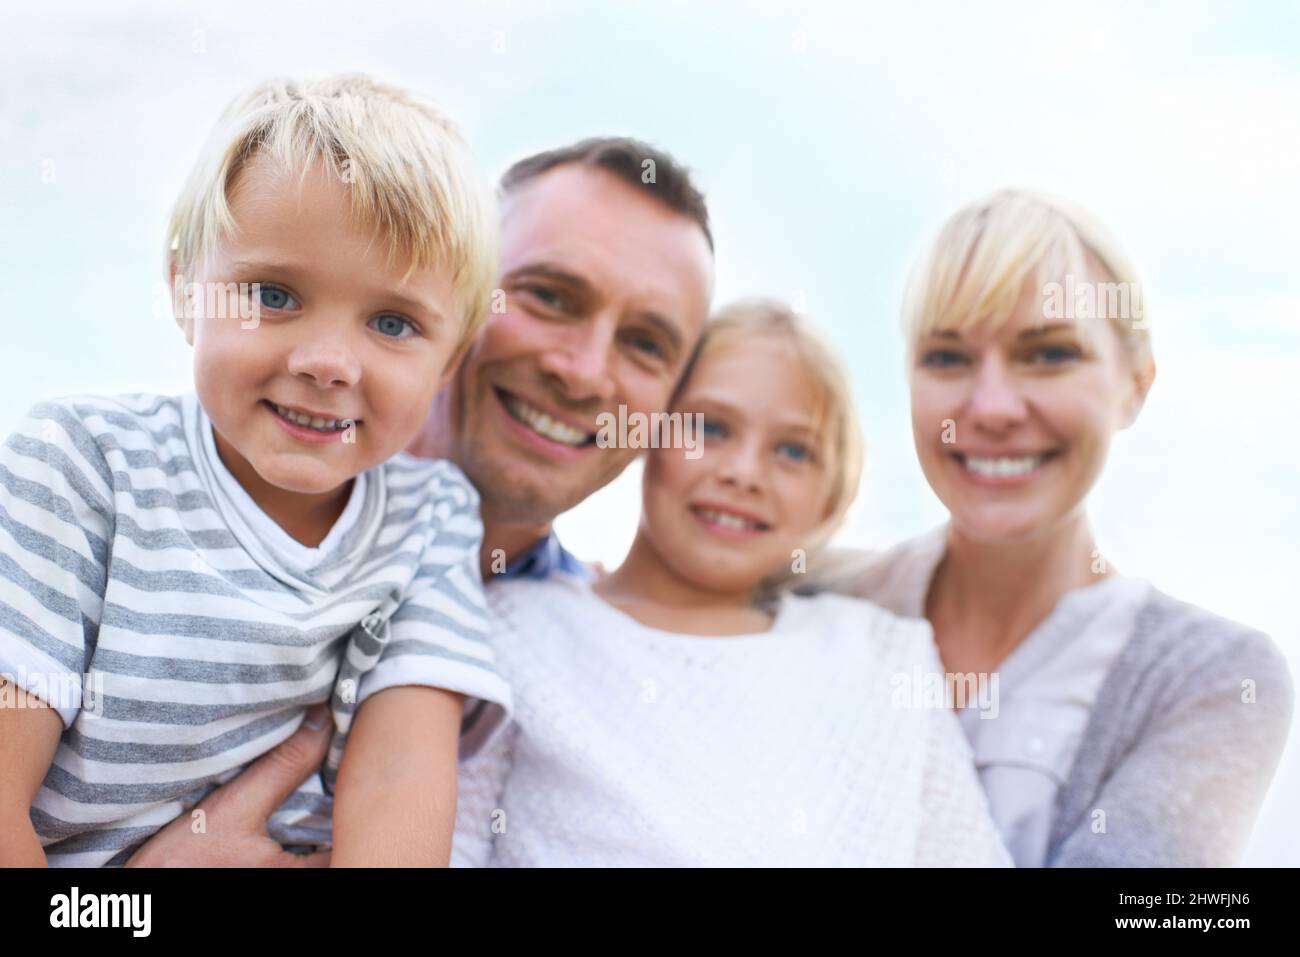 Theyre such a happy family. A happy two generation family smiling while outdoors. Stock Photo